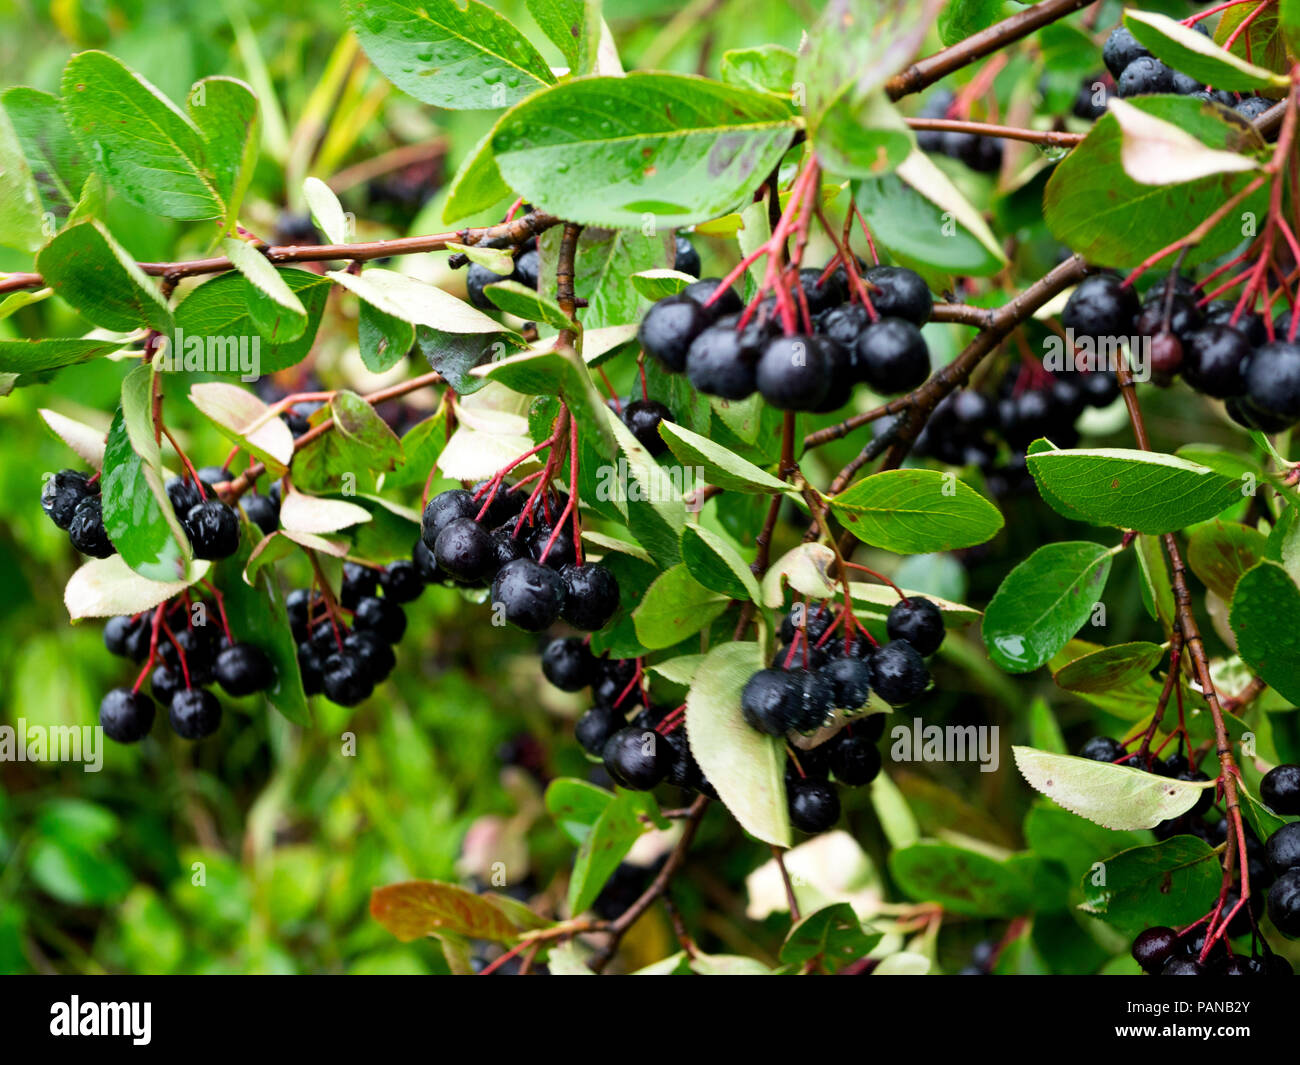 Sprig with the fruit of Common Kruger (Frangula alnus Mill.) On a summer rainy day Stock Photo